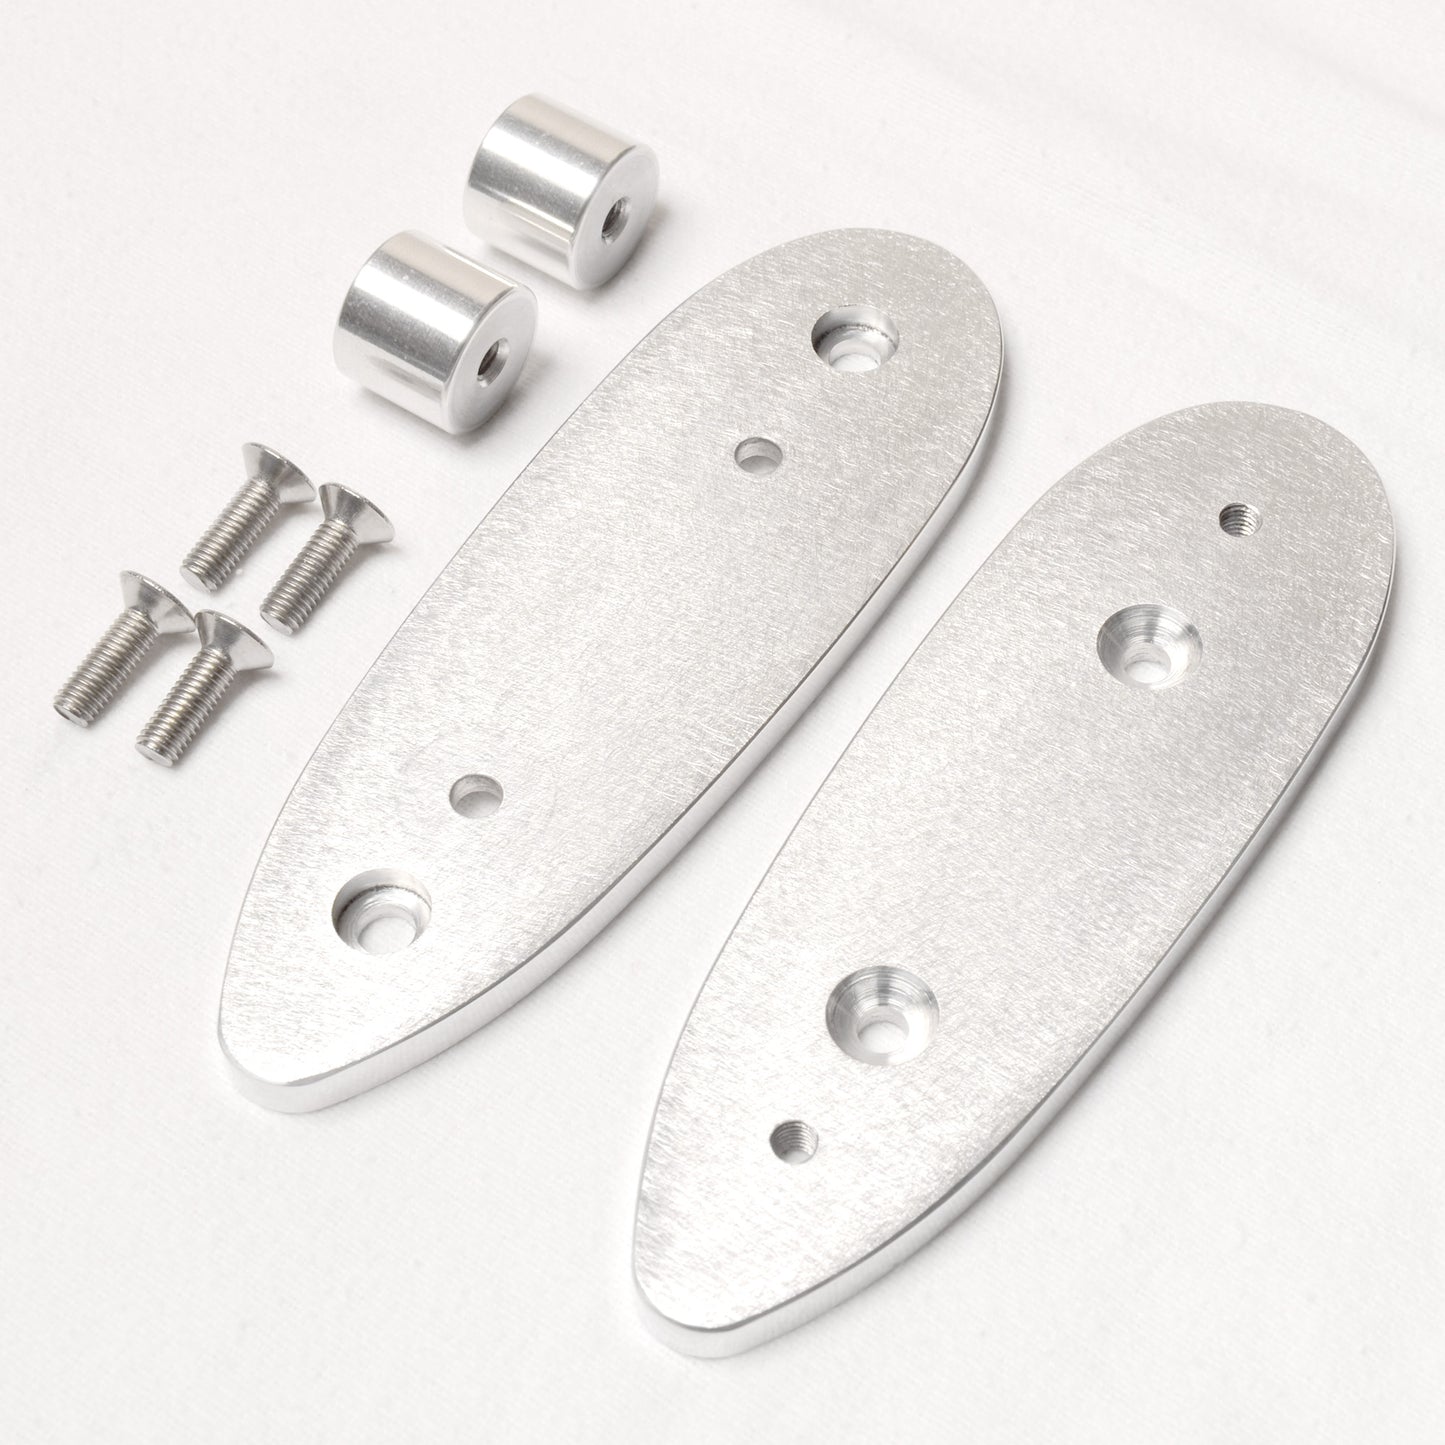 S400 MPR Butt Pad Spacer Plate Set.